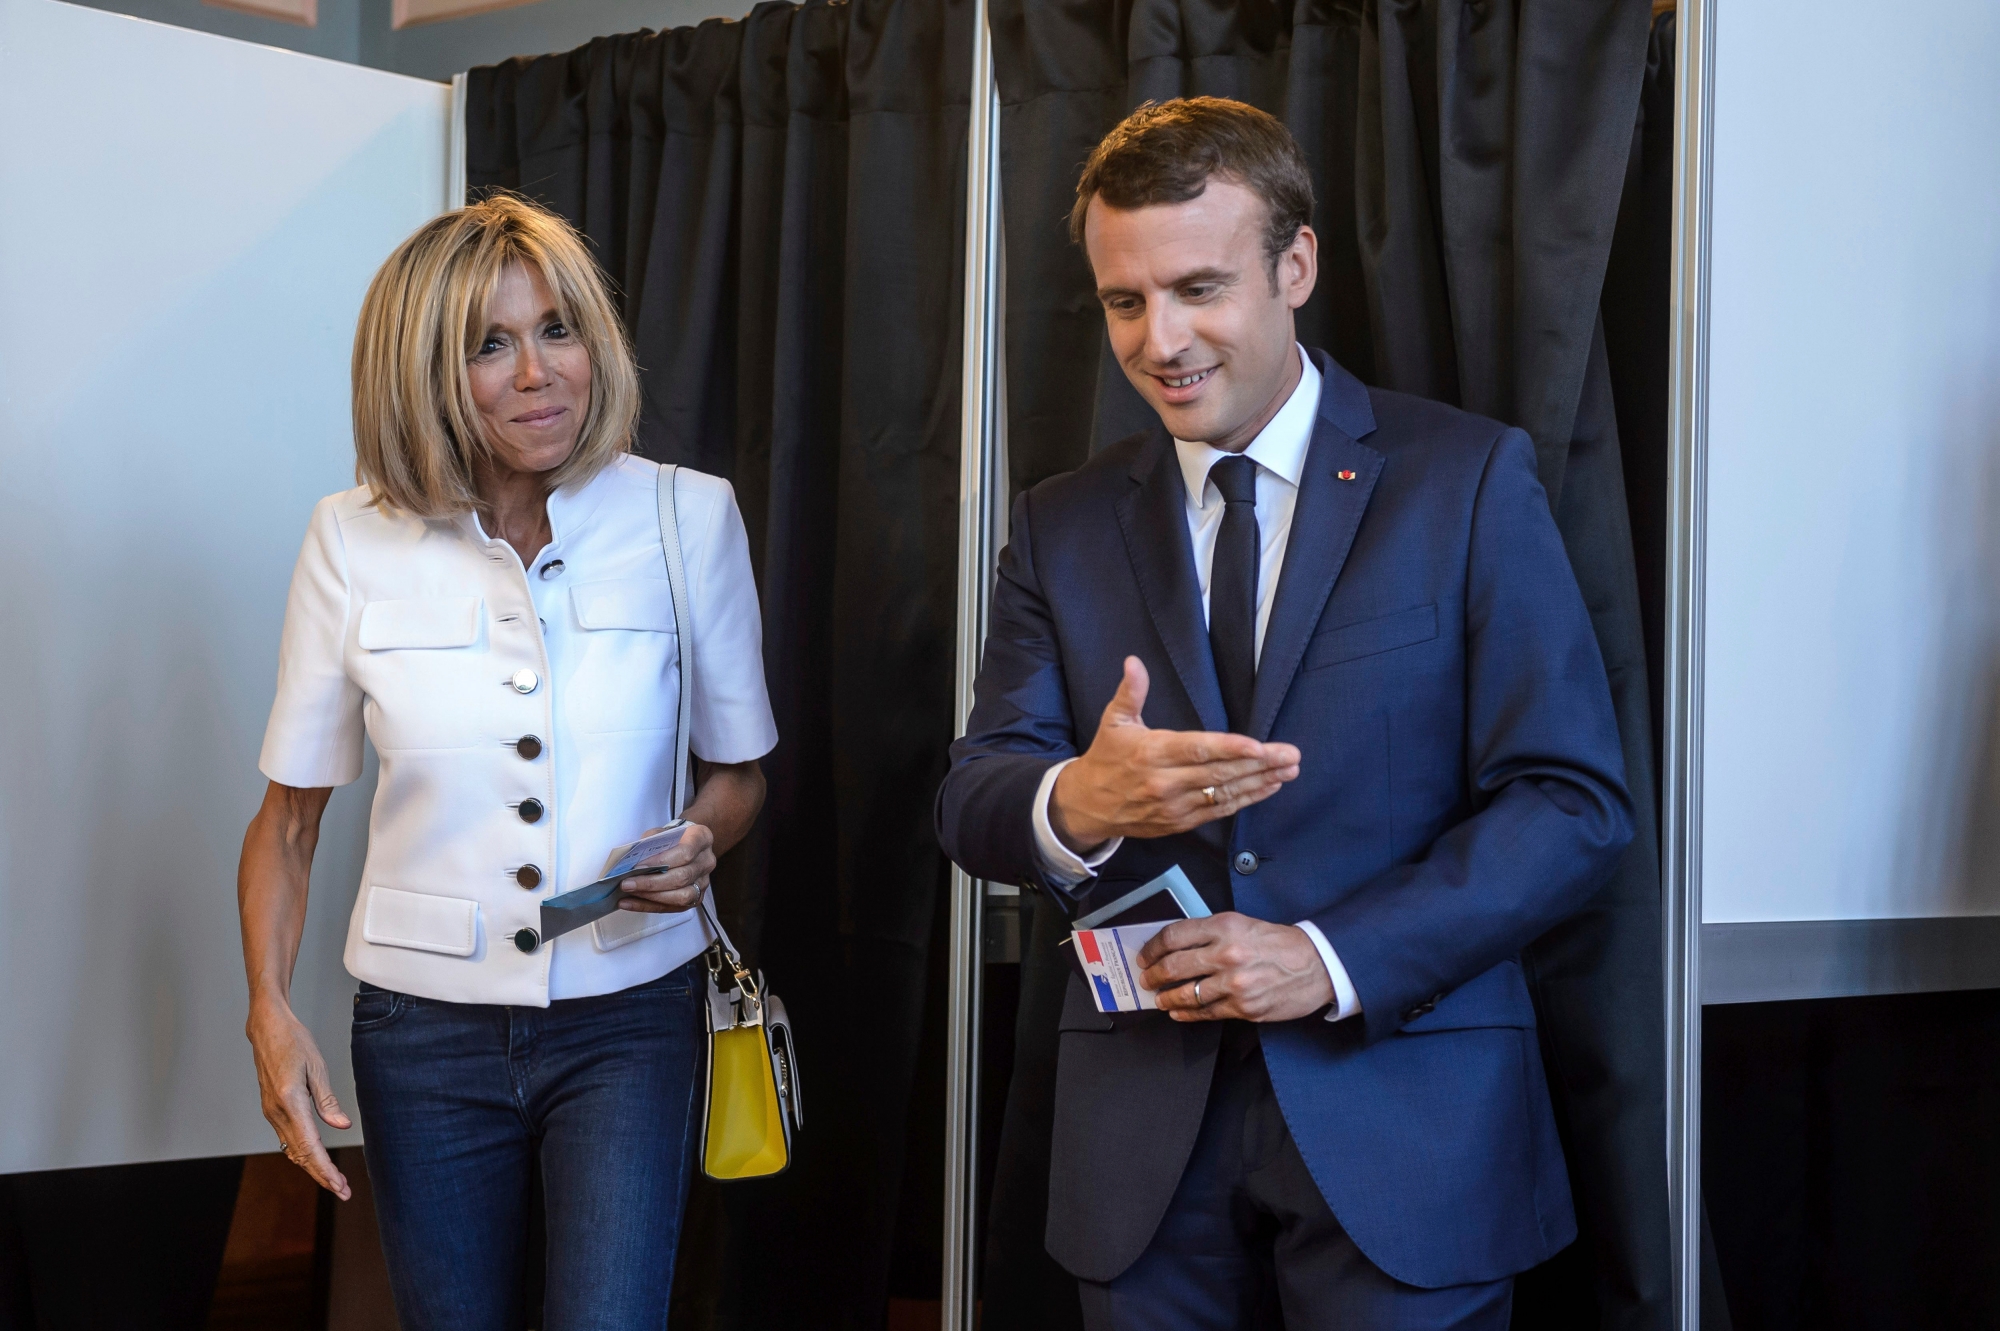 French President Emmanuel Macron and his wife Brigitte Macron leave a polling booth as they vote in the first round of the two-stage legislative elections, in Le Touquet, northern France, Sunday, June 11, 2017. French voters are choosing legislators in the first round of parliamentary elections, with President Emmanuel Macron's party "Republic on the Move" hoping to win a strong majority in the National Assembly to push through bold labor and security reforms. (Christophe Petit-Tesson/Pool Photo via AP) France Elections